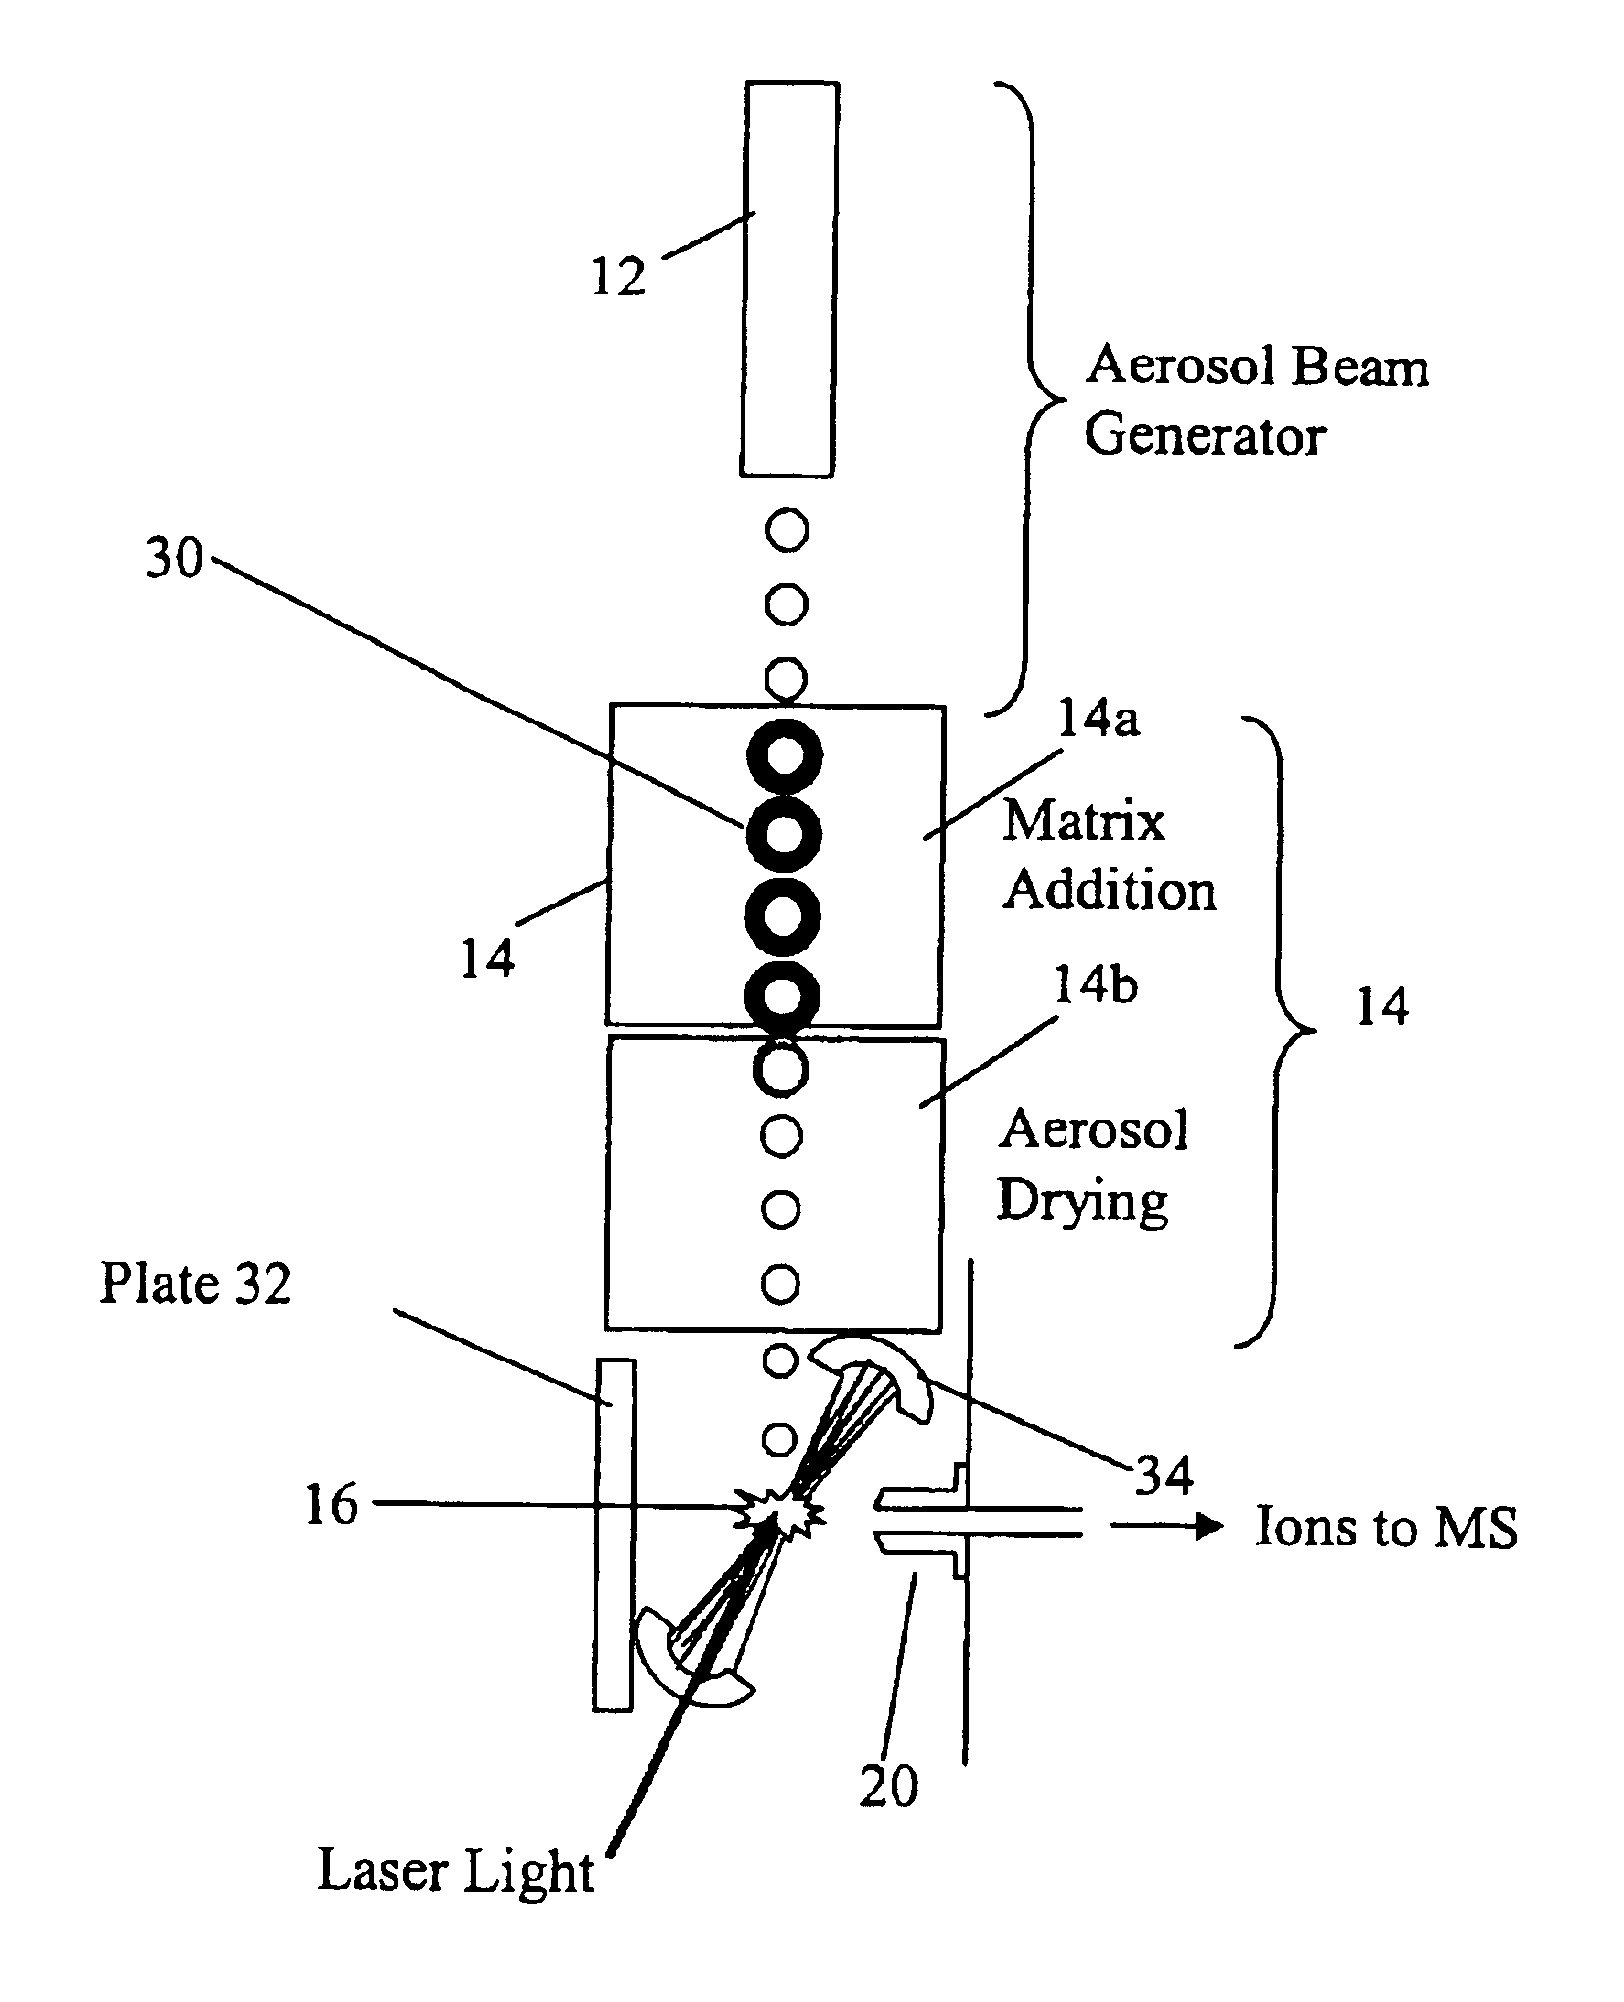 Method and apparatus for mass spectrometry analysis of aerosol particles at atmospheric pressure